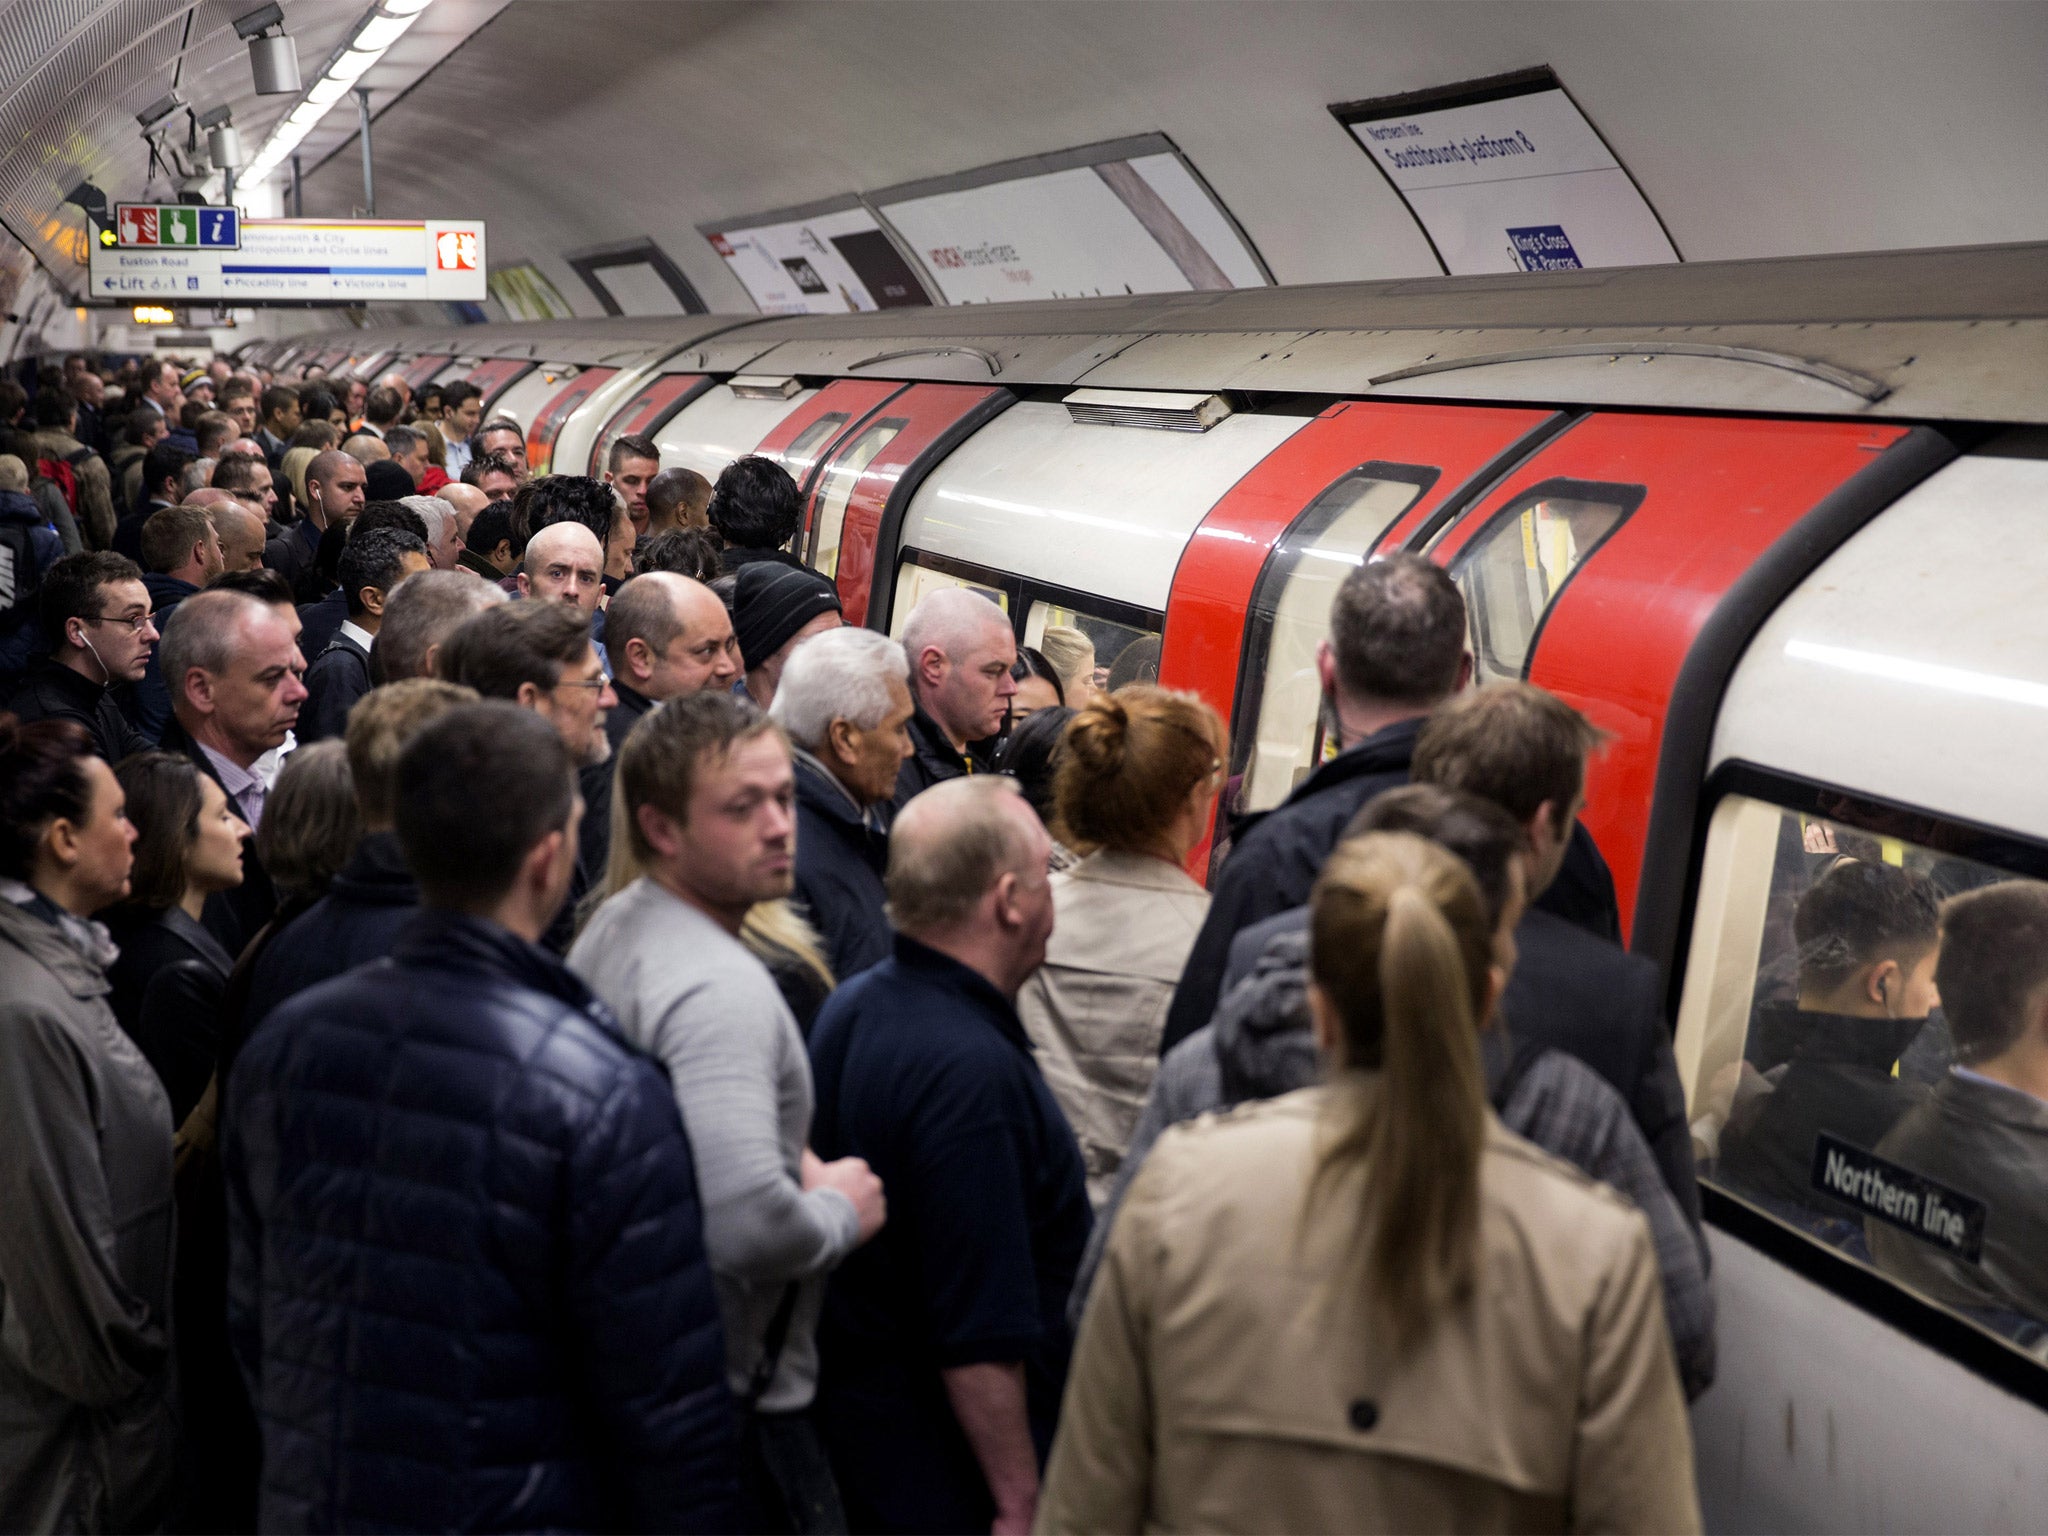 The London Underground could be 'overwhelmed' according to TfL chief